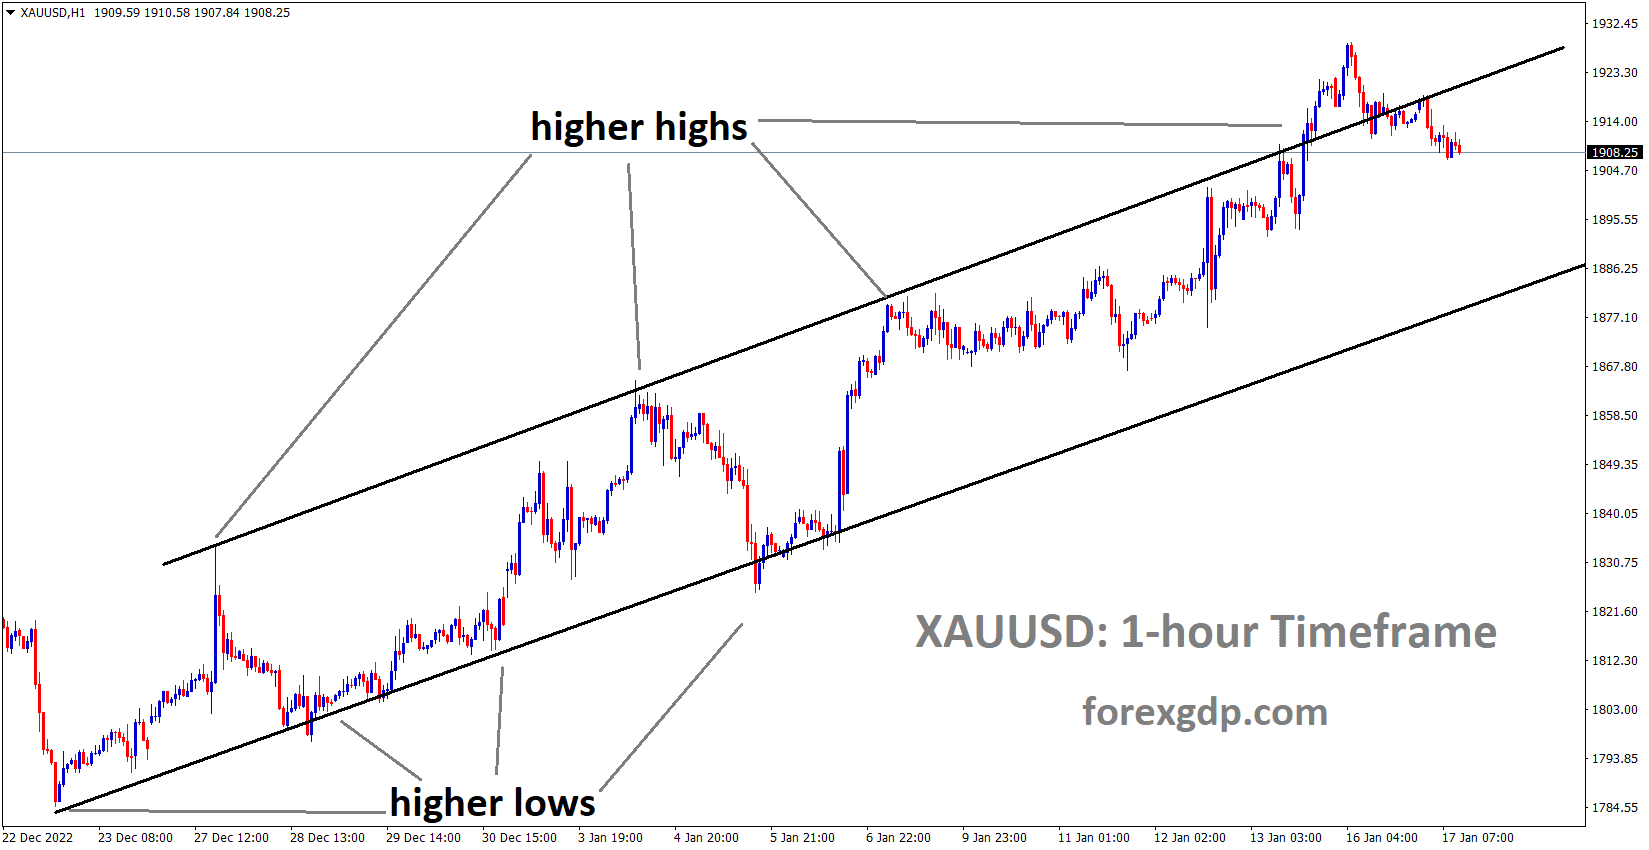 XAUUSD Gold price is moving in an Ascending channel and the market has fallen from the higher high area of the channel 2